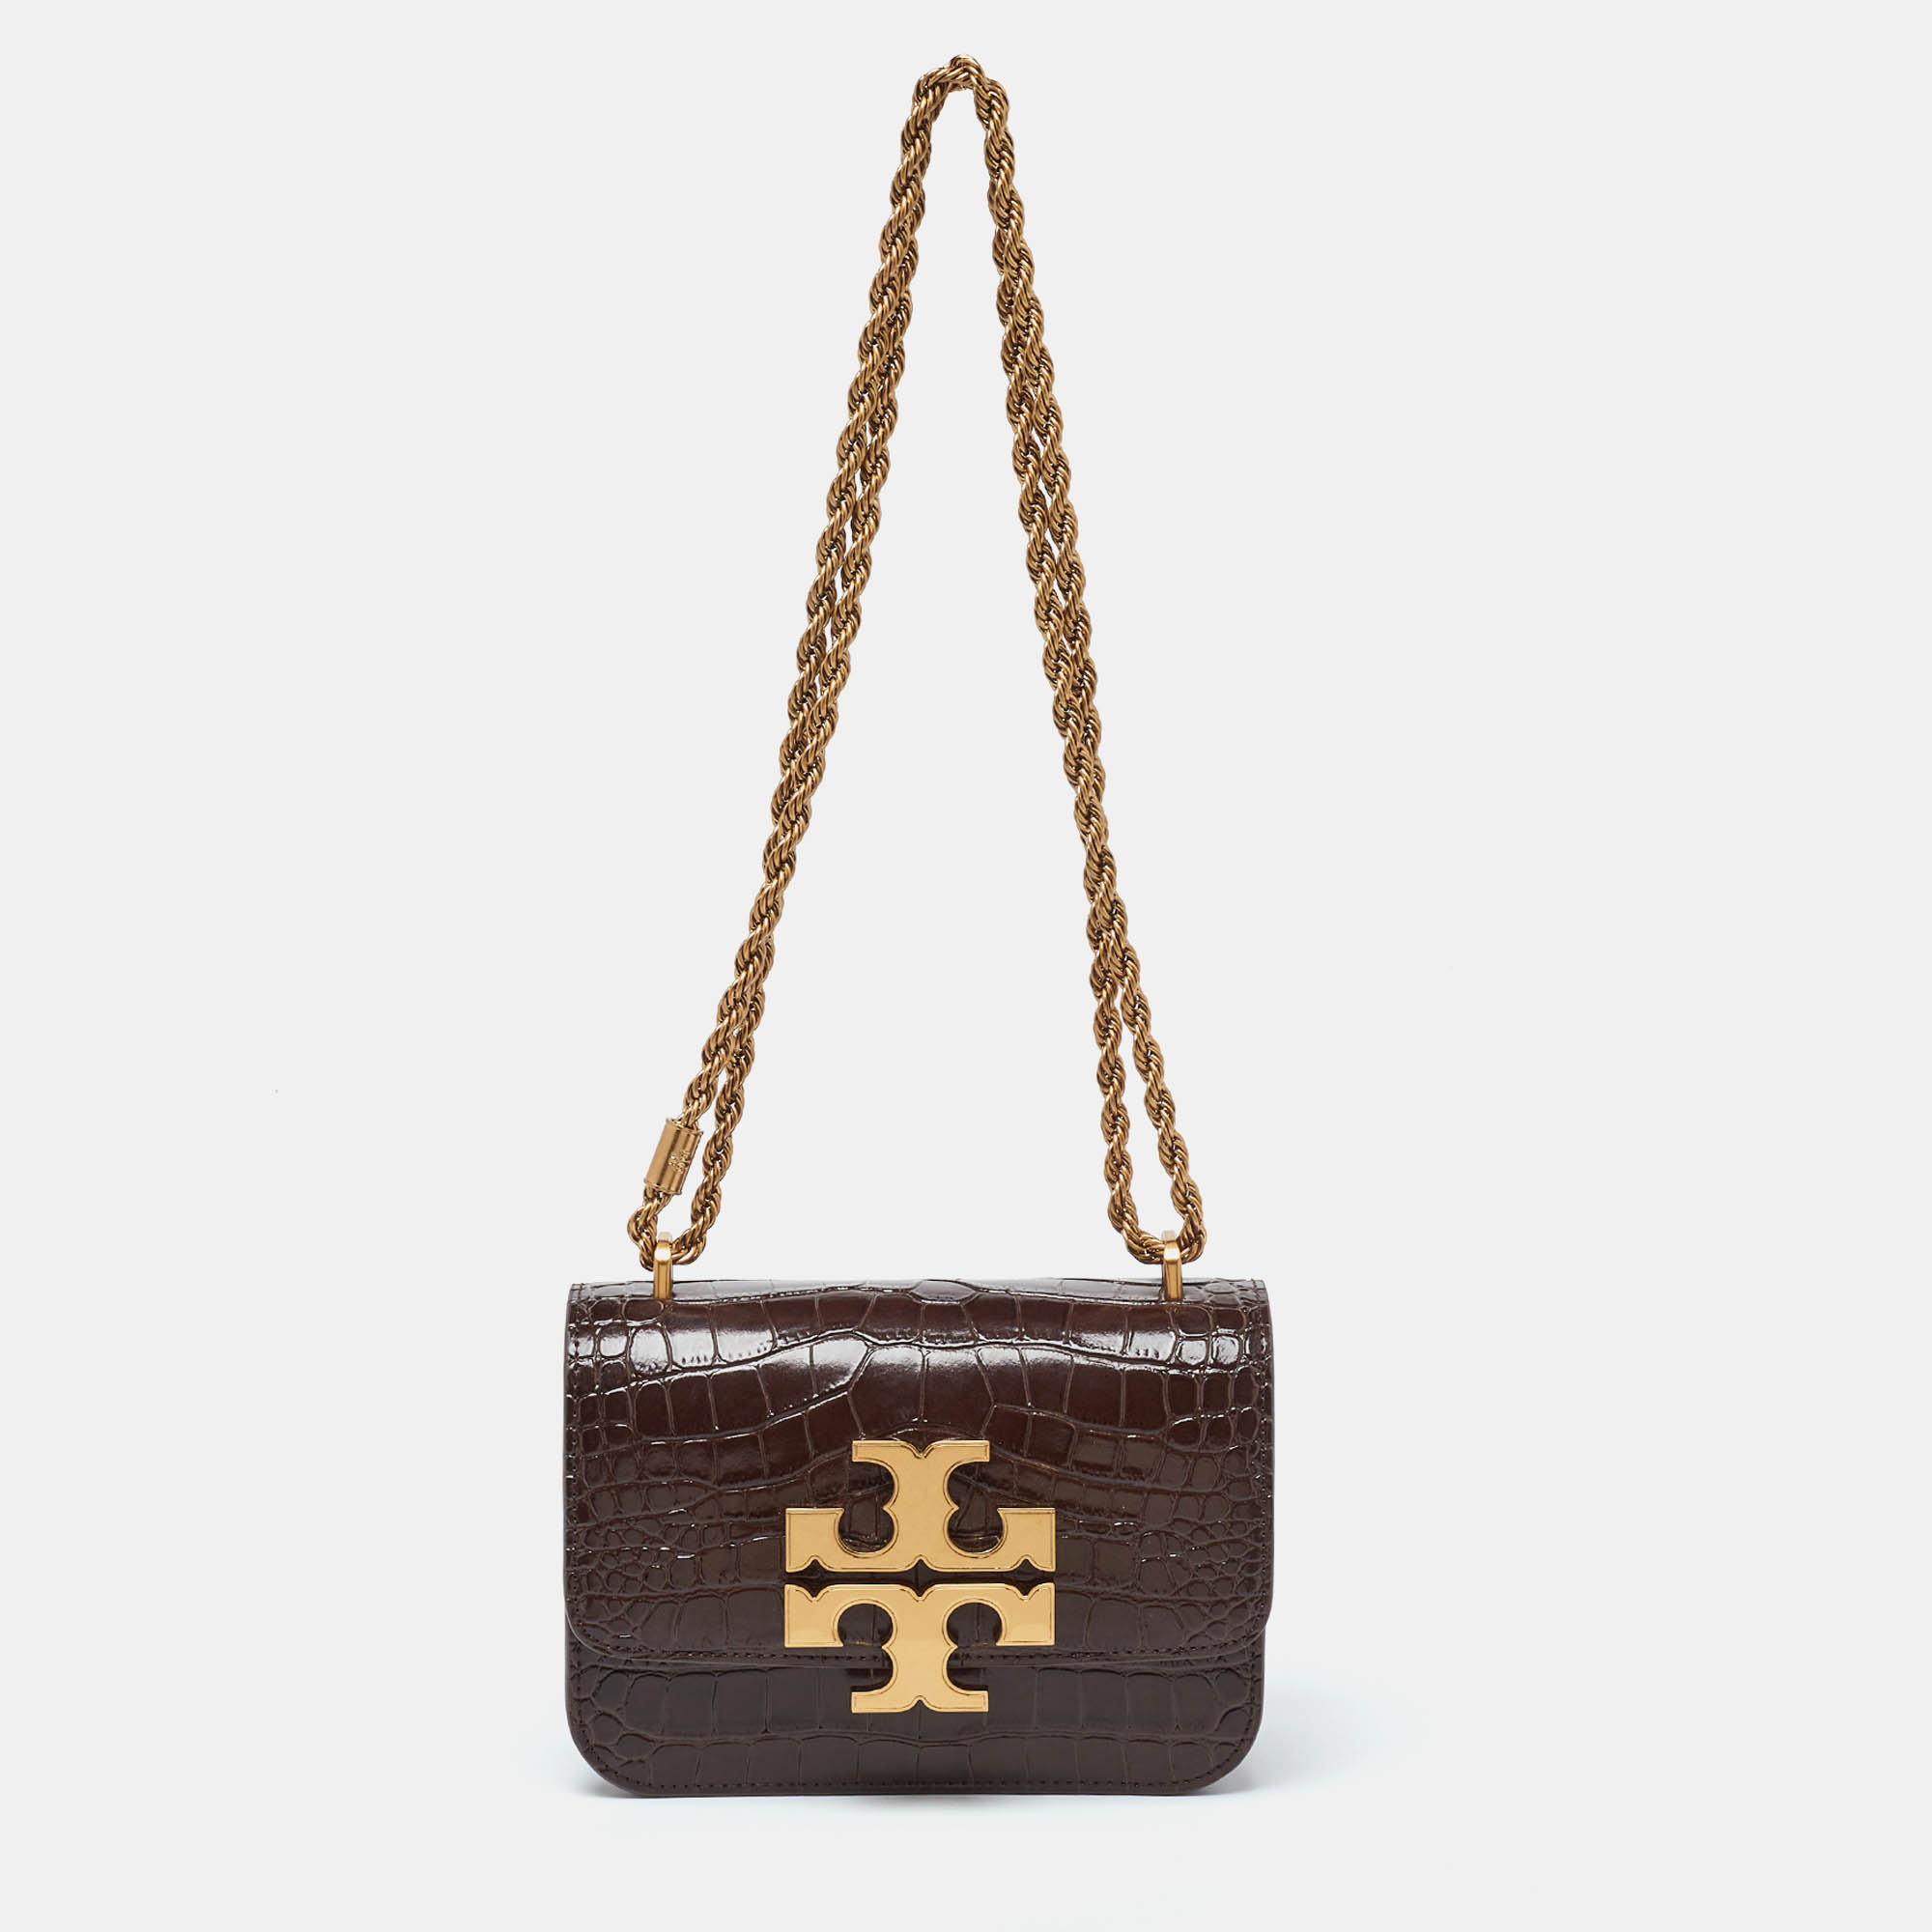 Tory burch brown croc embossed leather small eleanor shoulder bag